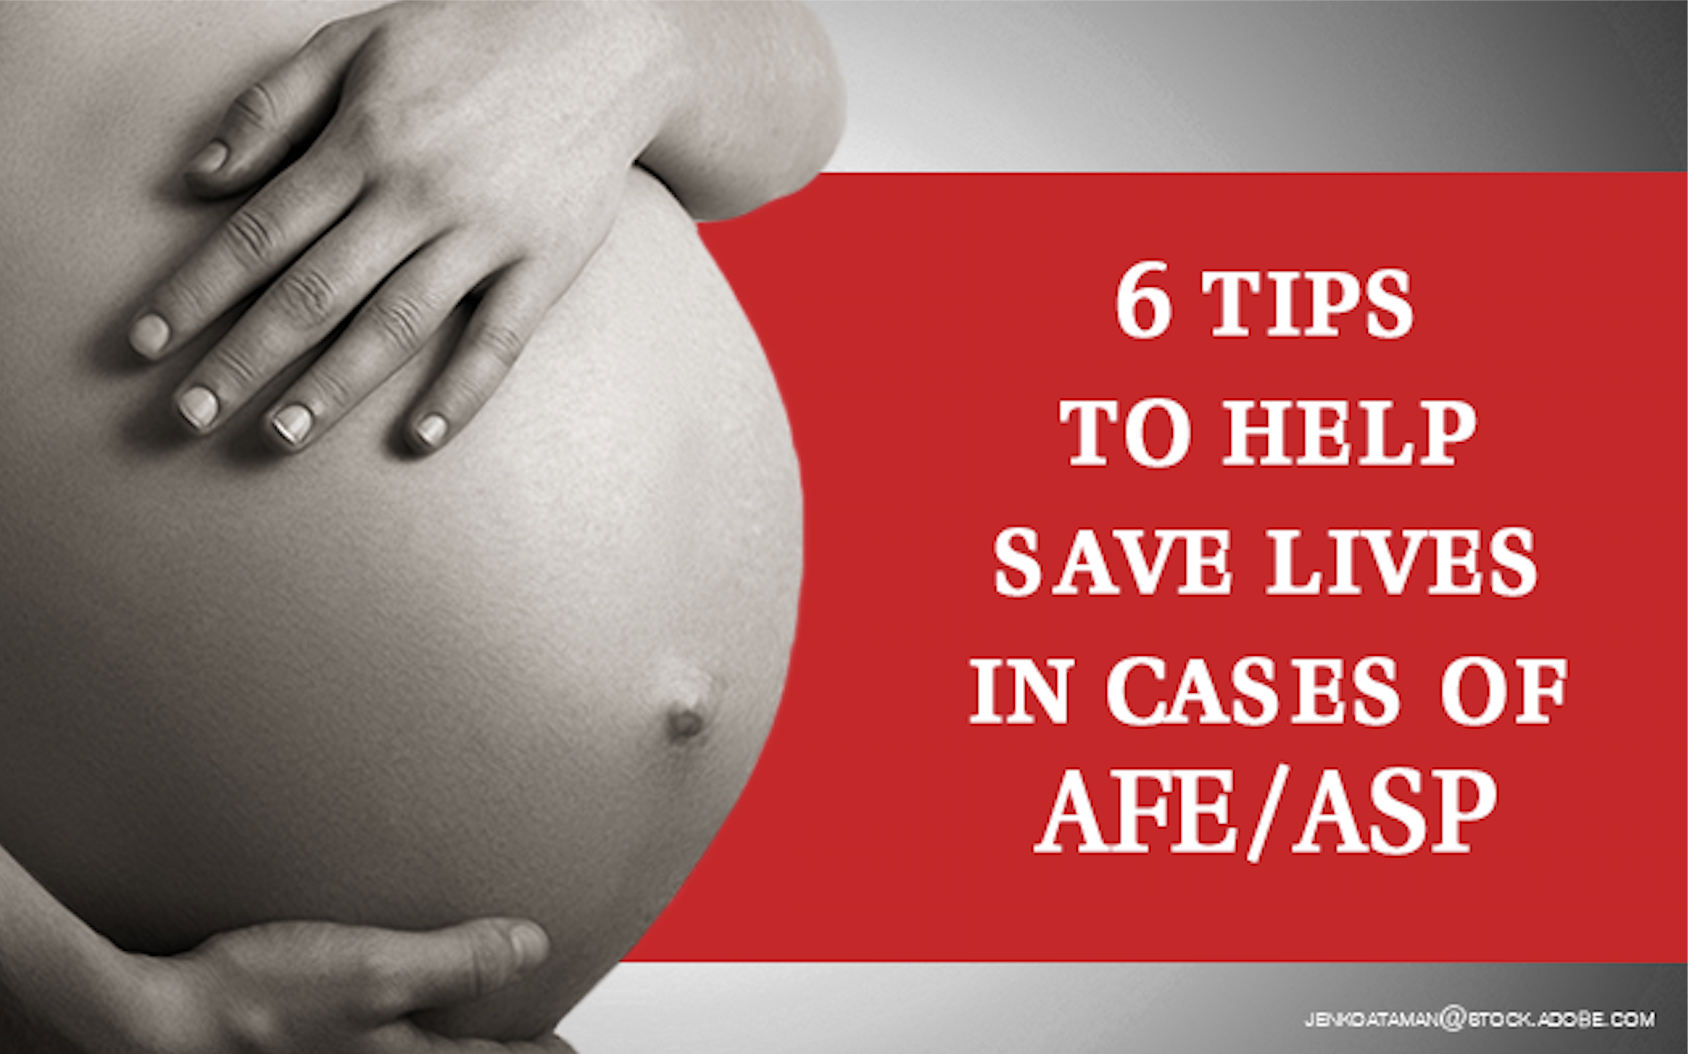 6 tips to help save lives in cases of AFE/ASP